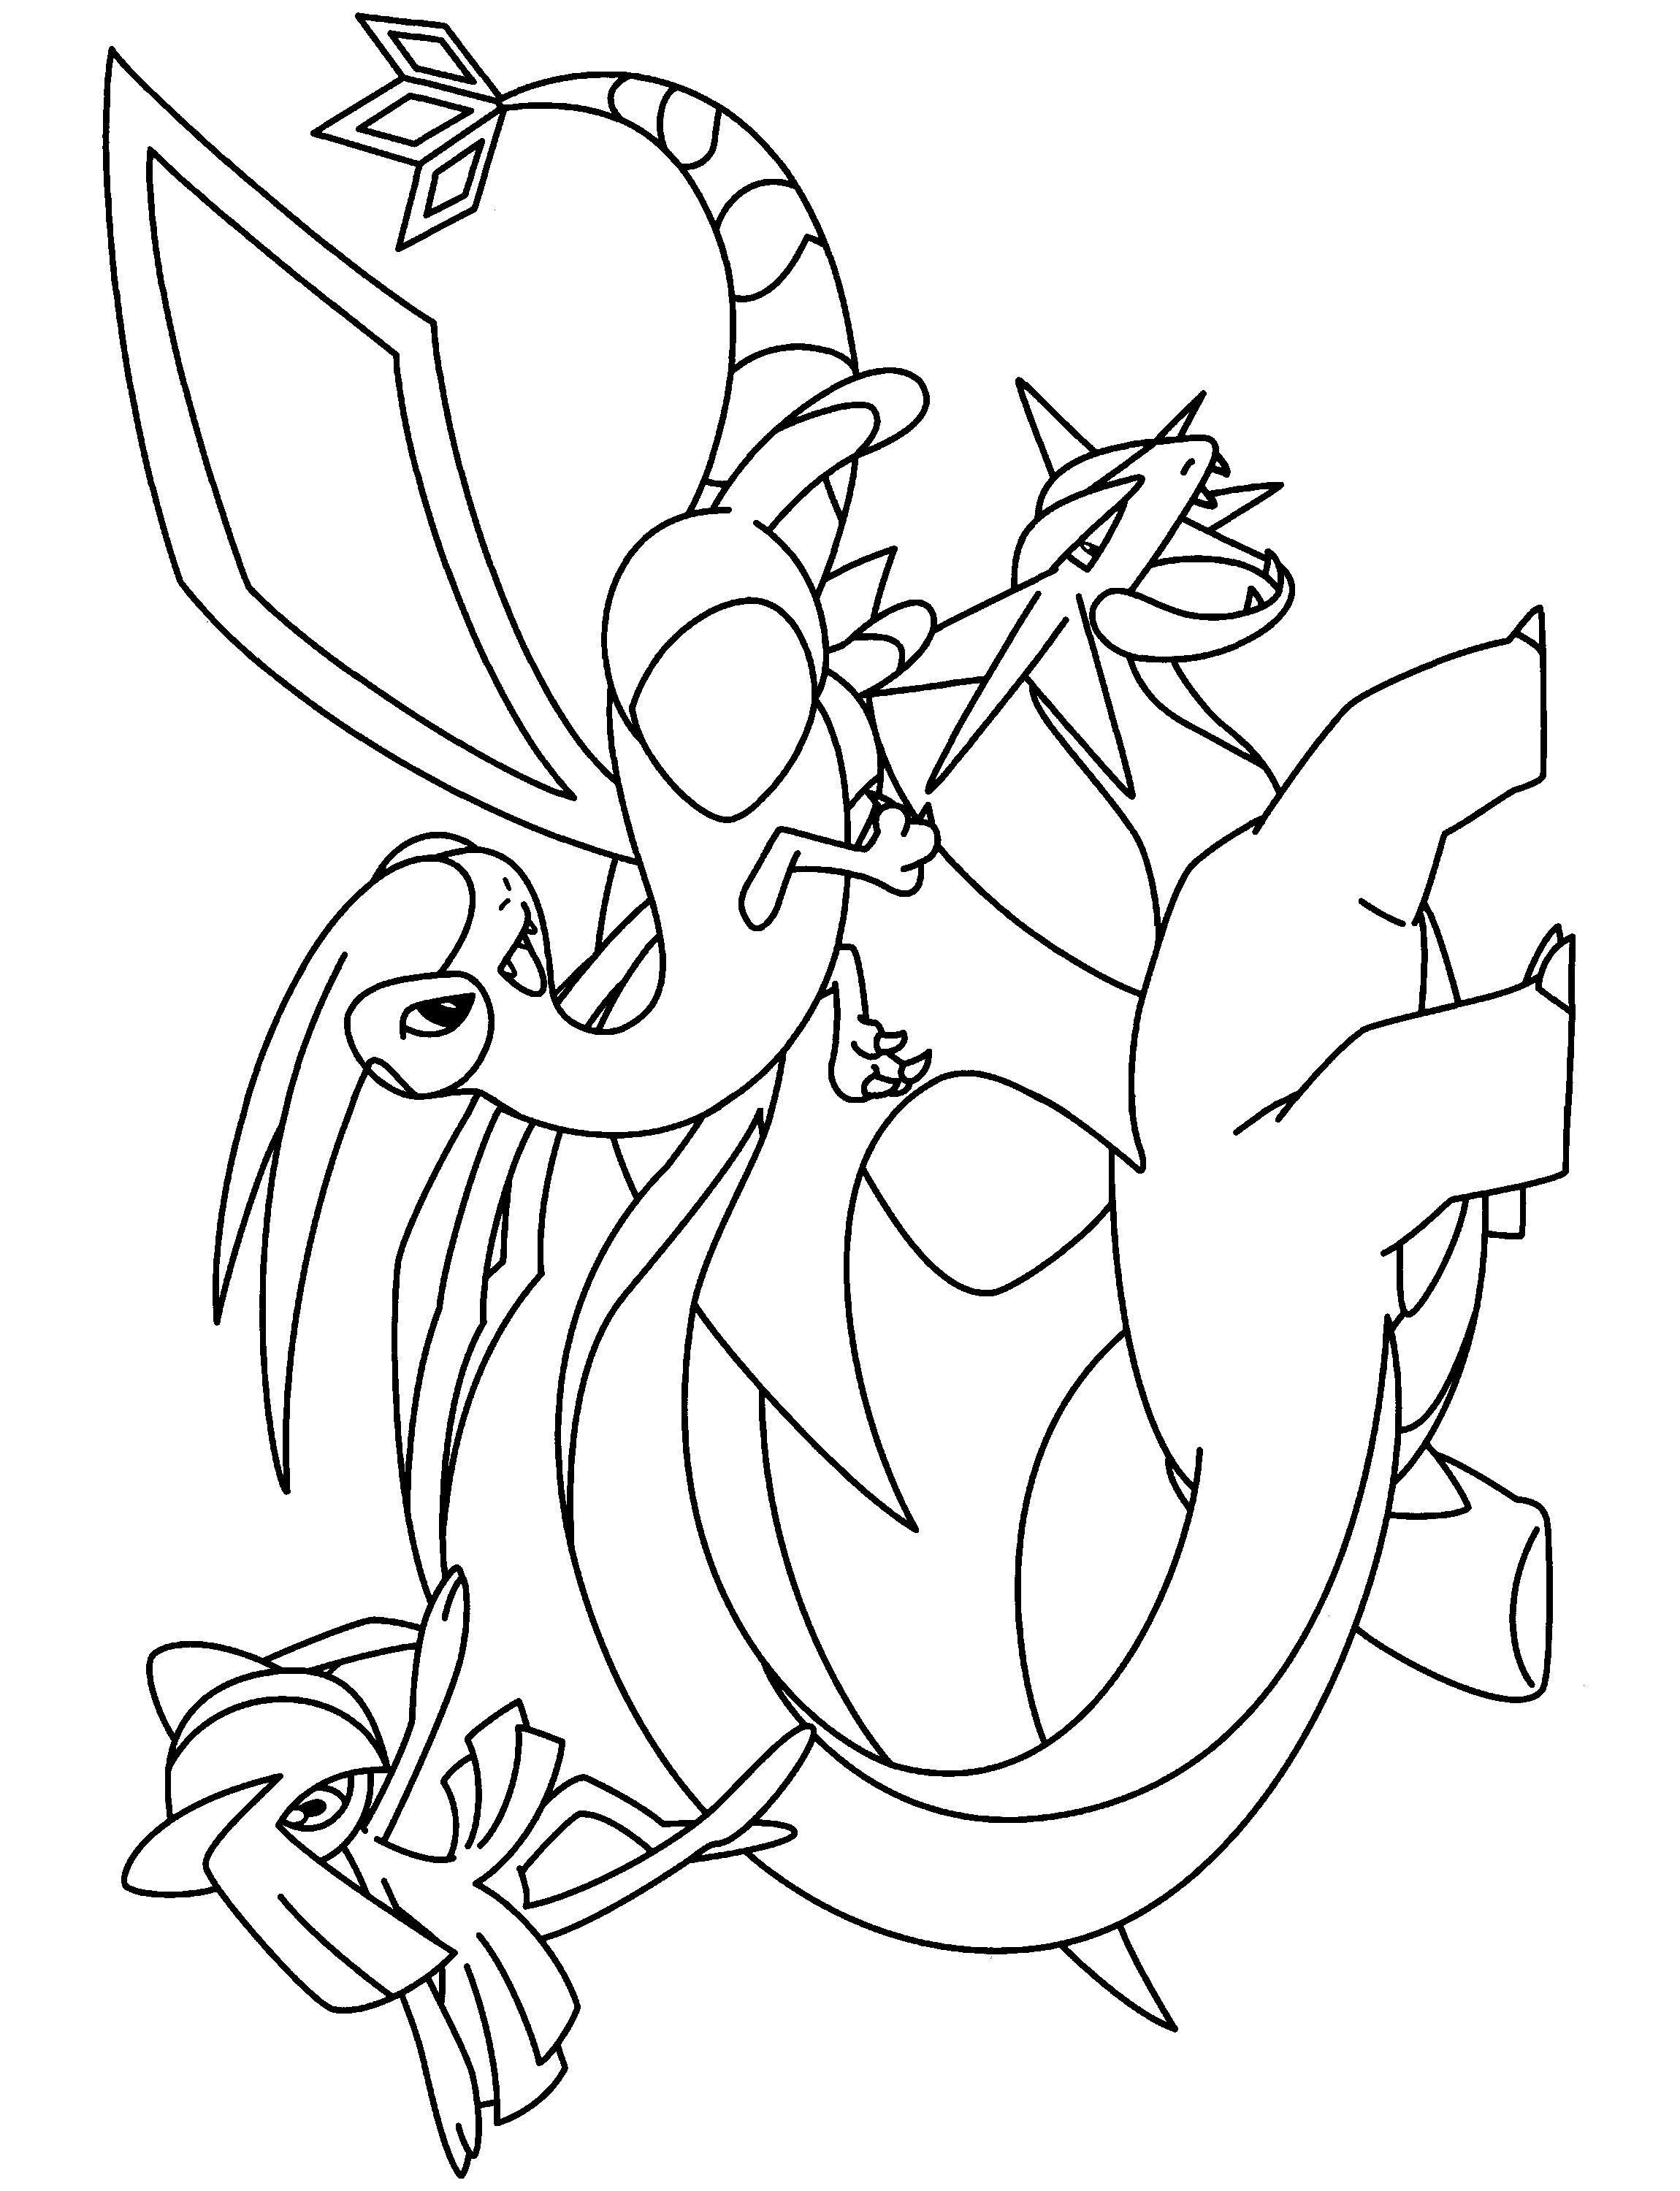 Coloring Page Pokemon Advanced Coloring Pages 258 Pokemon Coloring Pages Pokemon Colo